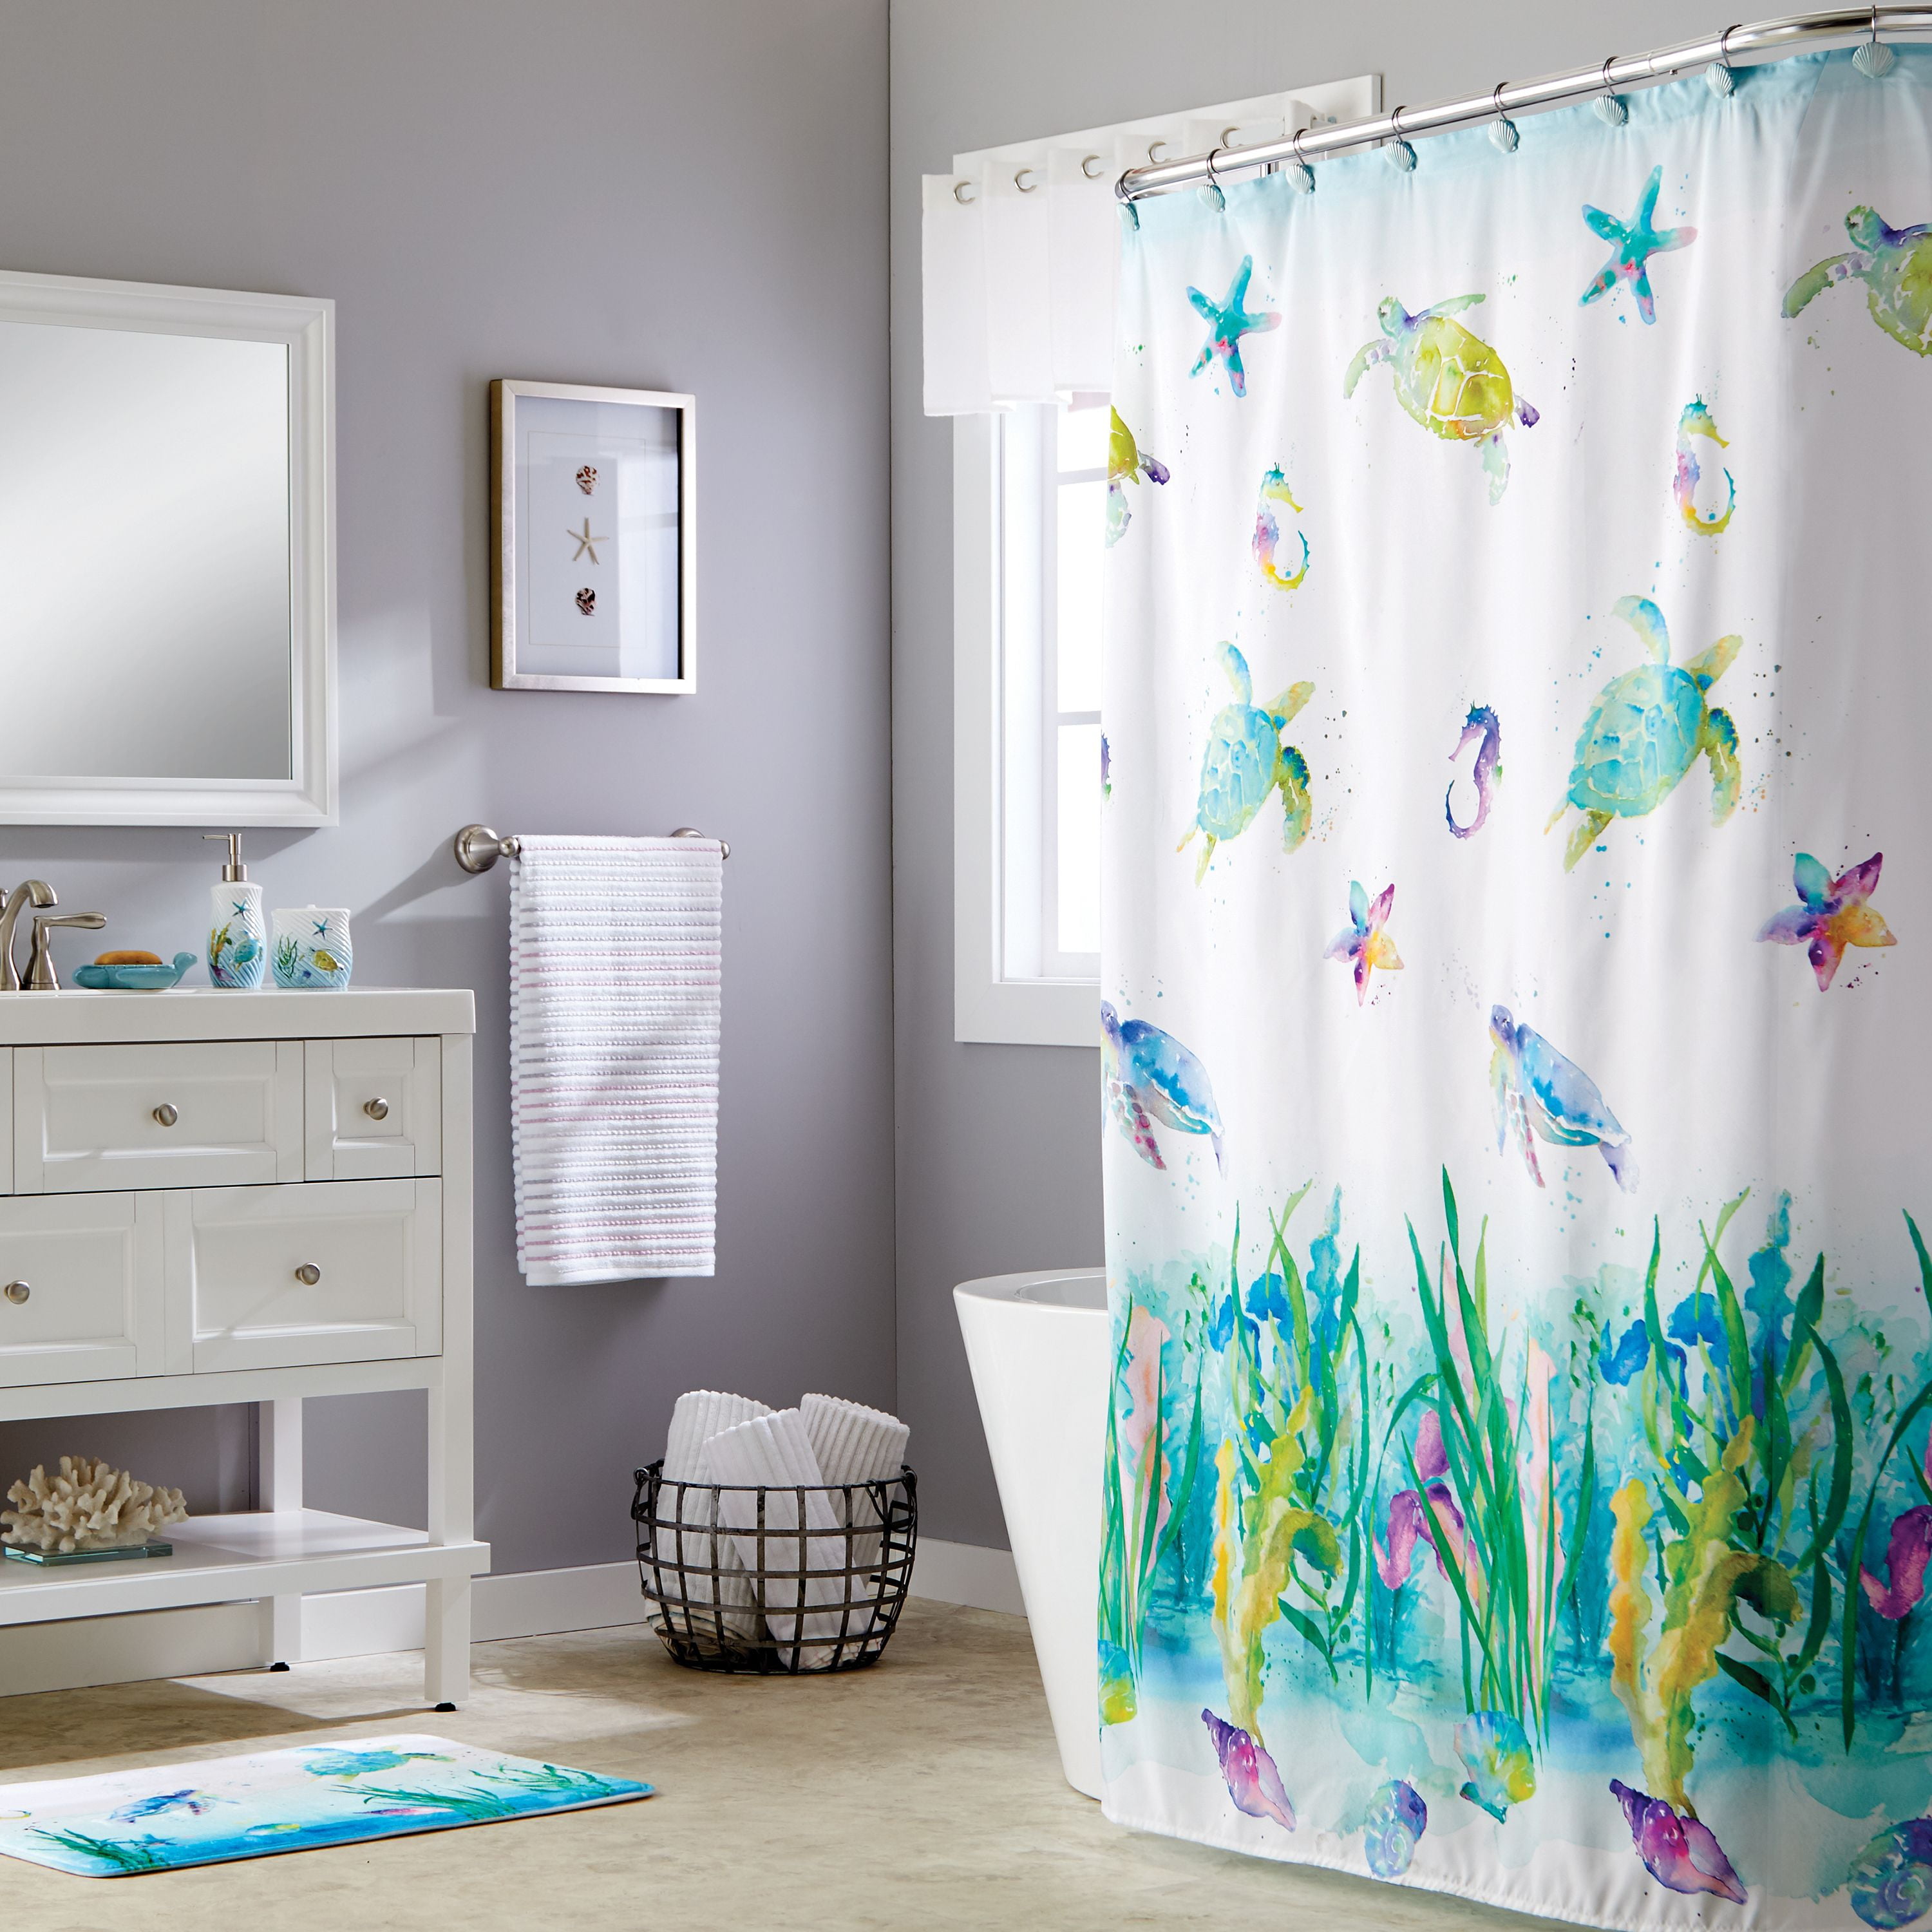 Details about   Starfish Coral Watercolor Painting Fabric Shower Curtain Set Bathroom Decor 72"